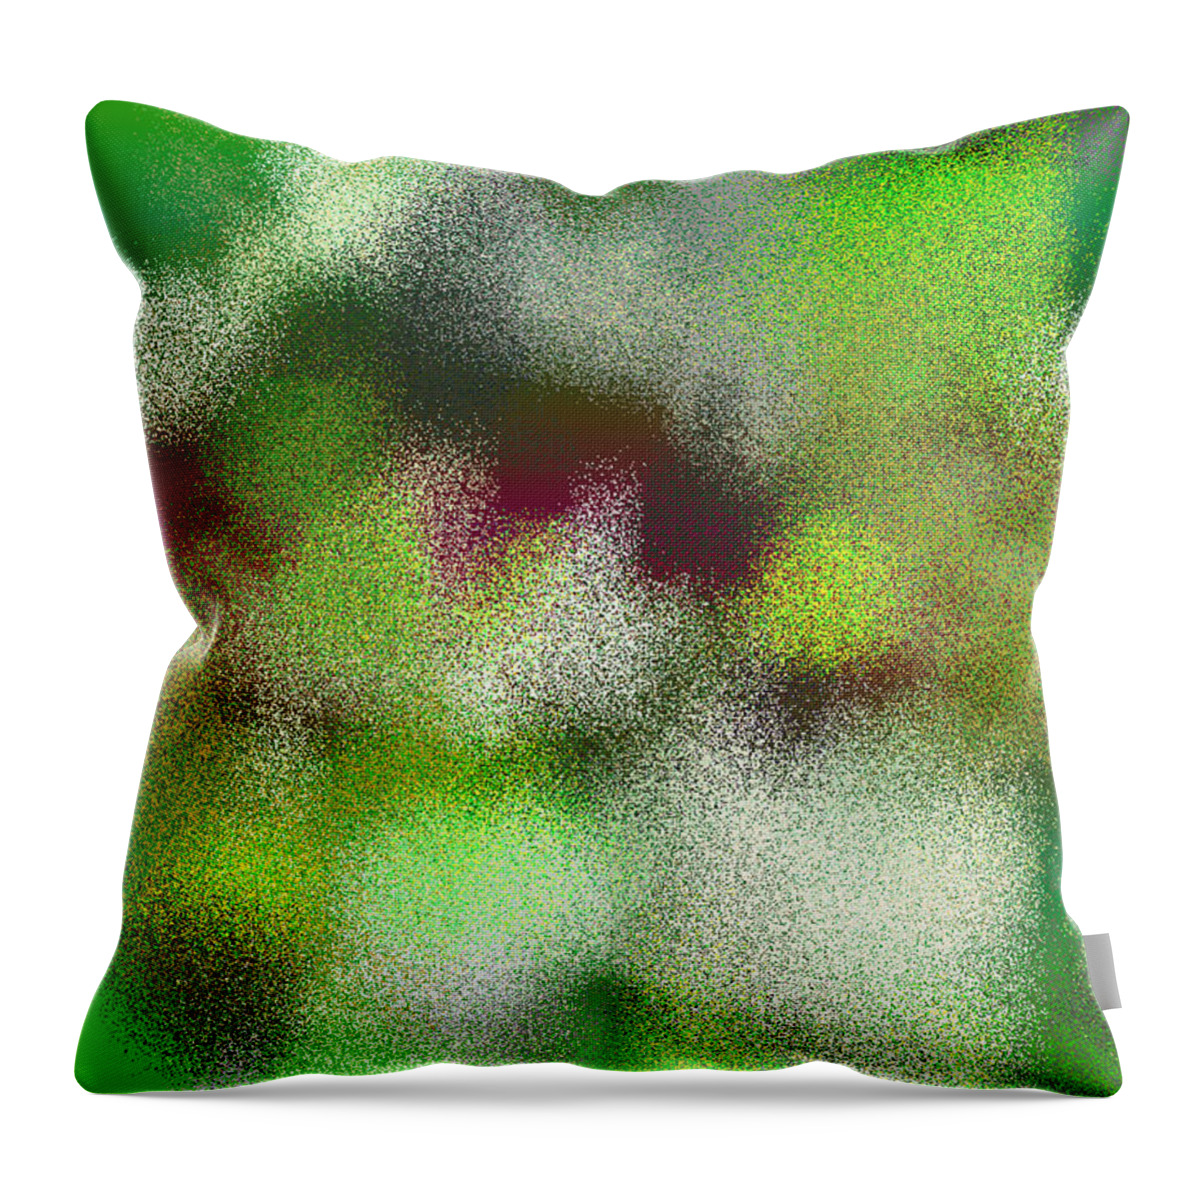 Abstract Throw Pillow featuring the digital art T.1.62.4.5x7.3657x5120 by Gareth Lewis